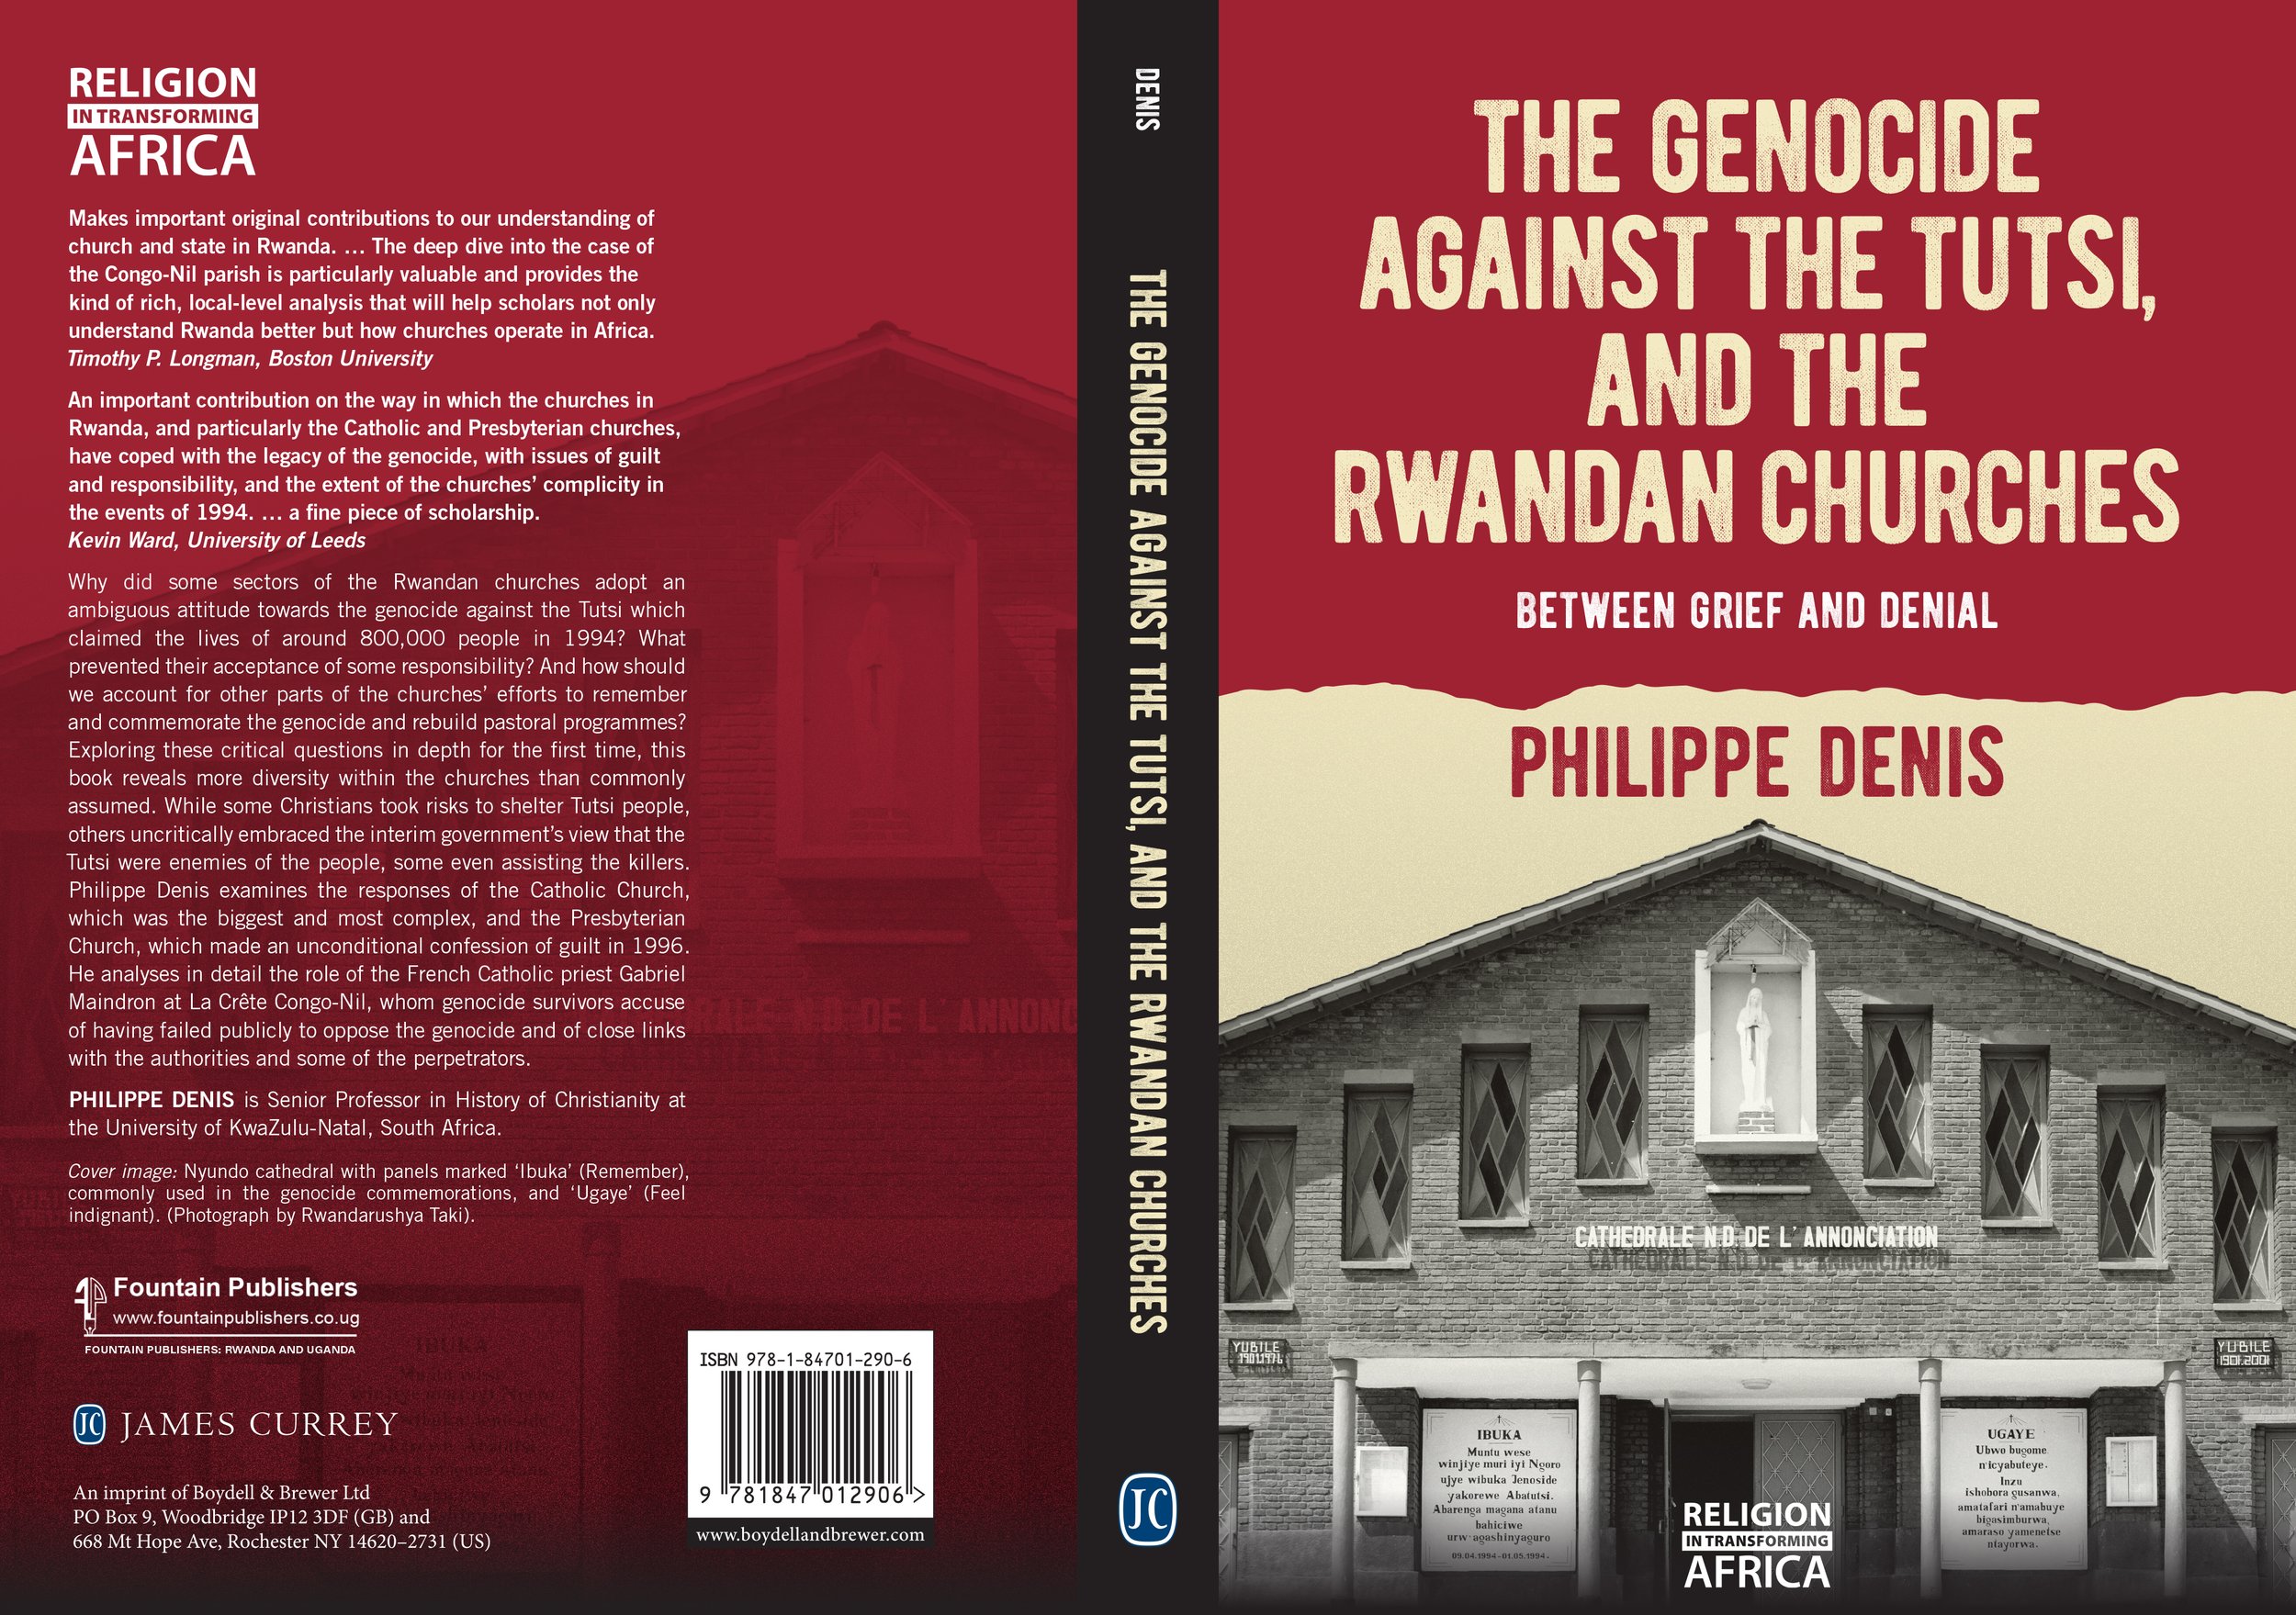 The Genocide against the Tutsi, and the Rwandan Churches